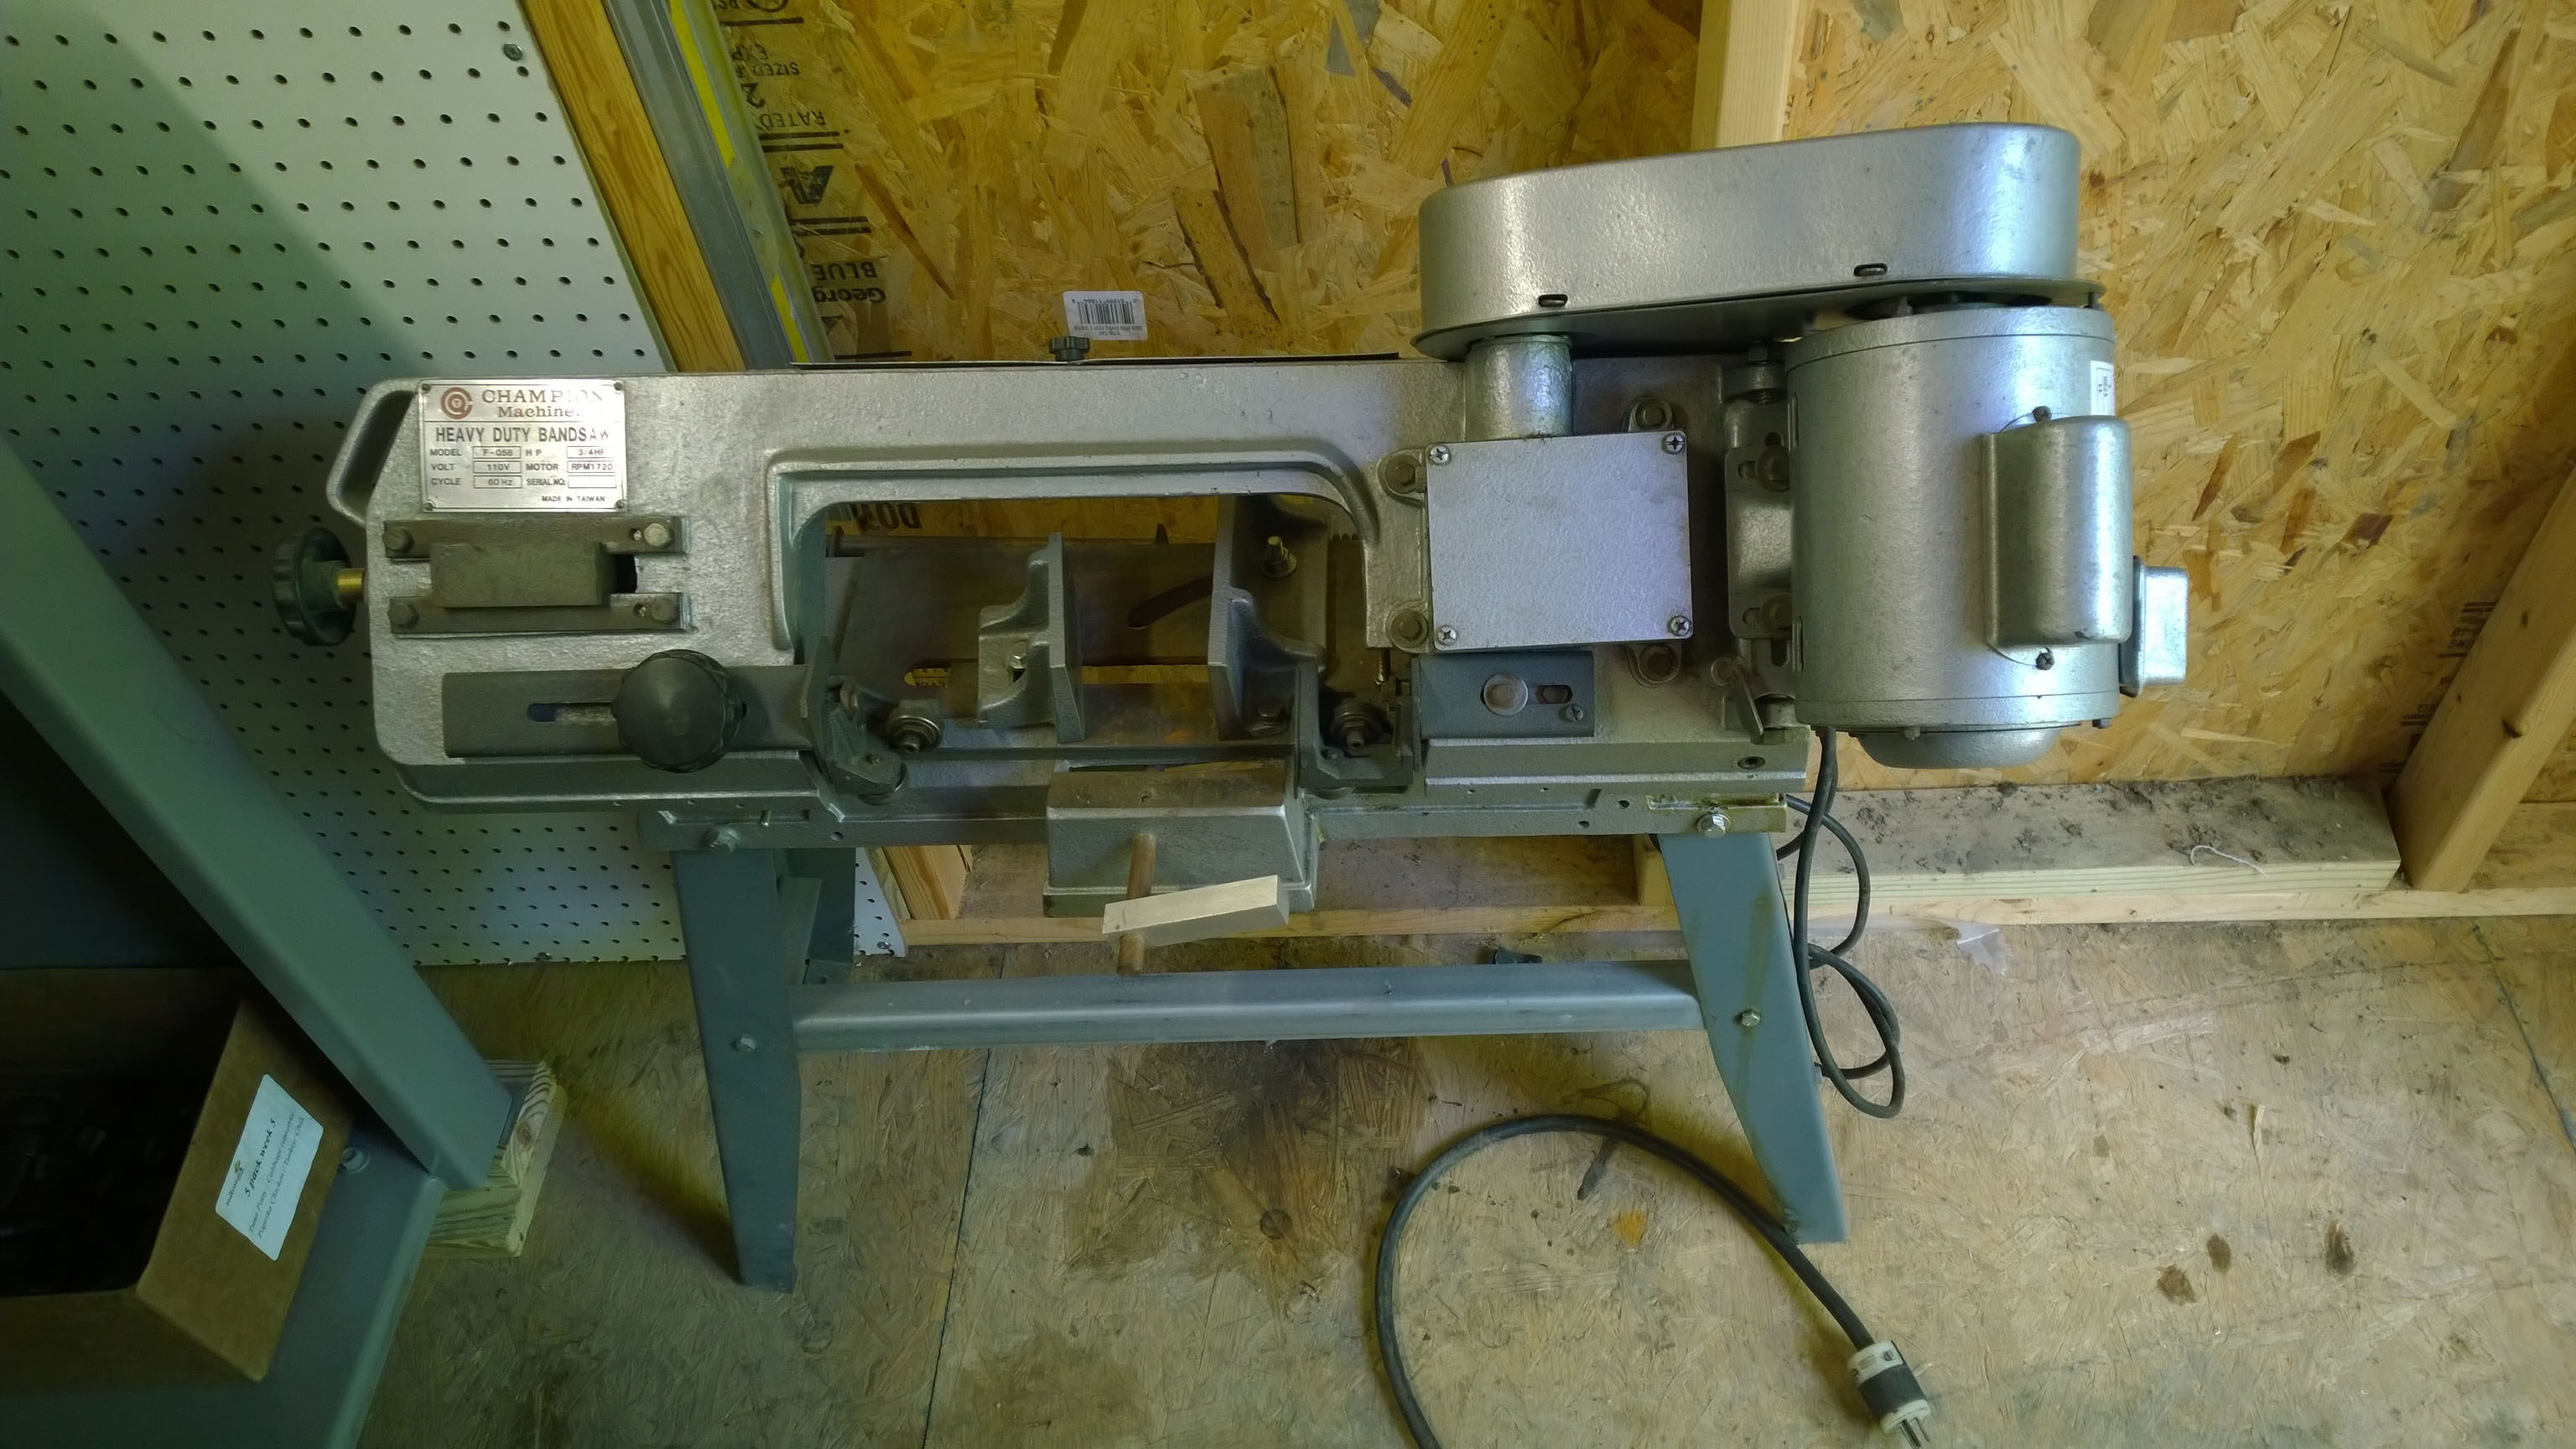 my band saw : found in an old barn so dirty you couldn't tell what it was supposed to be. It is about twenty years old. I rebuilt it and it is better than the new ones.